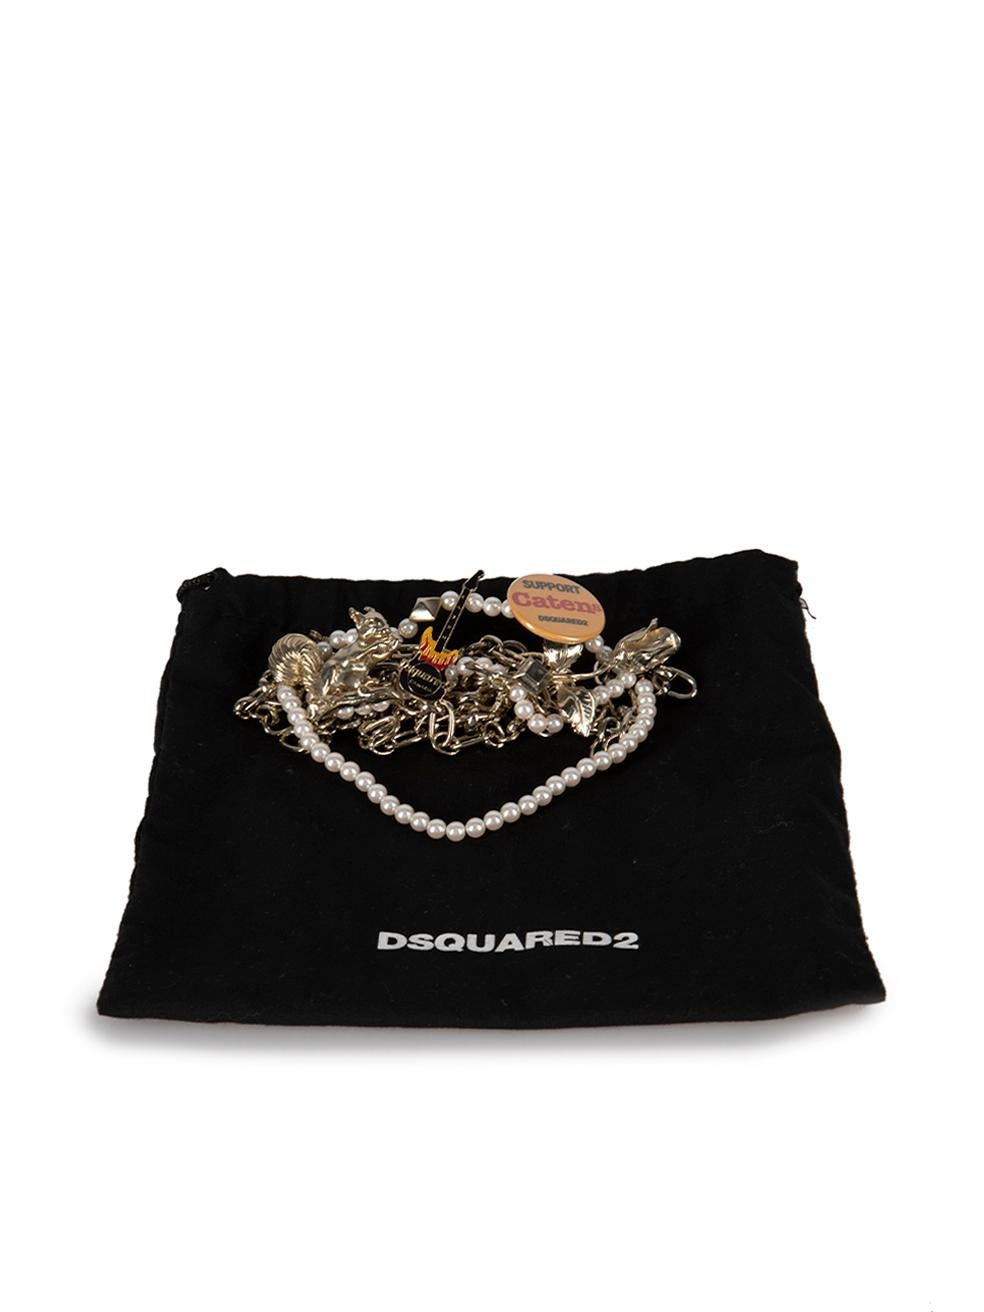 Dsquared2 Women's Gold Support Catens Chain Belt For Sale 2